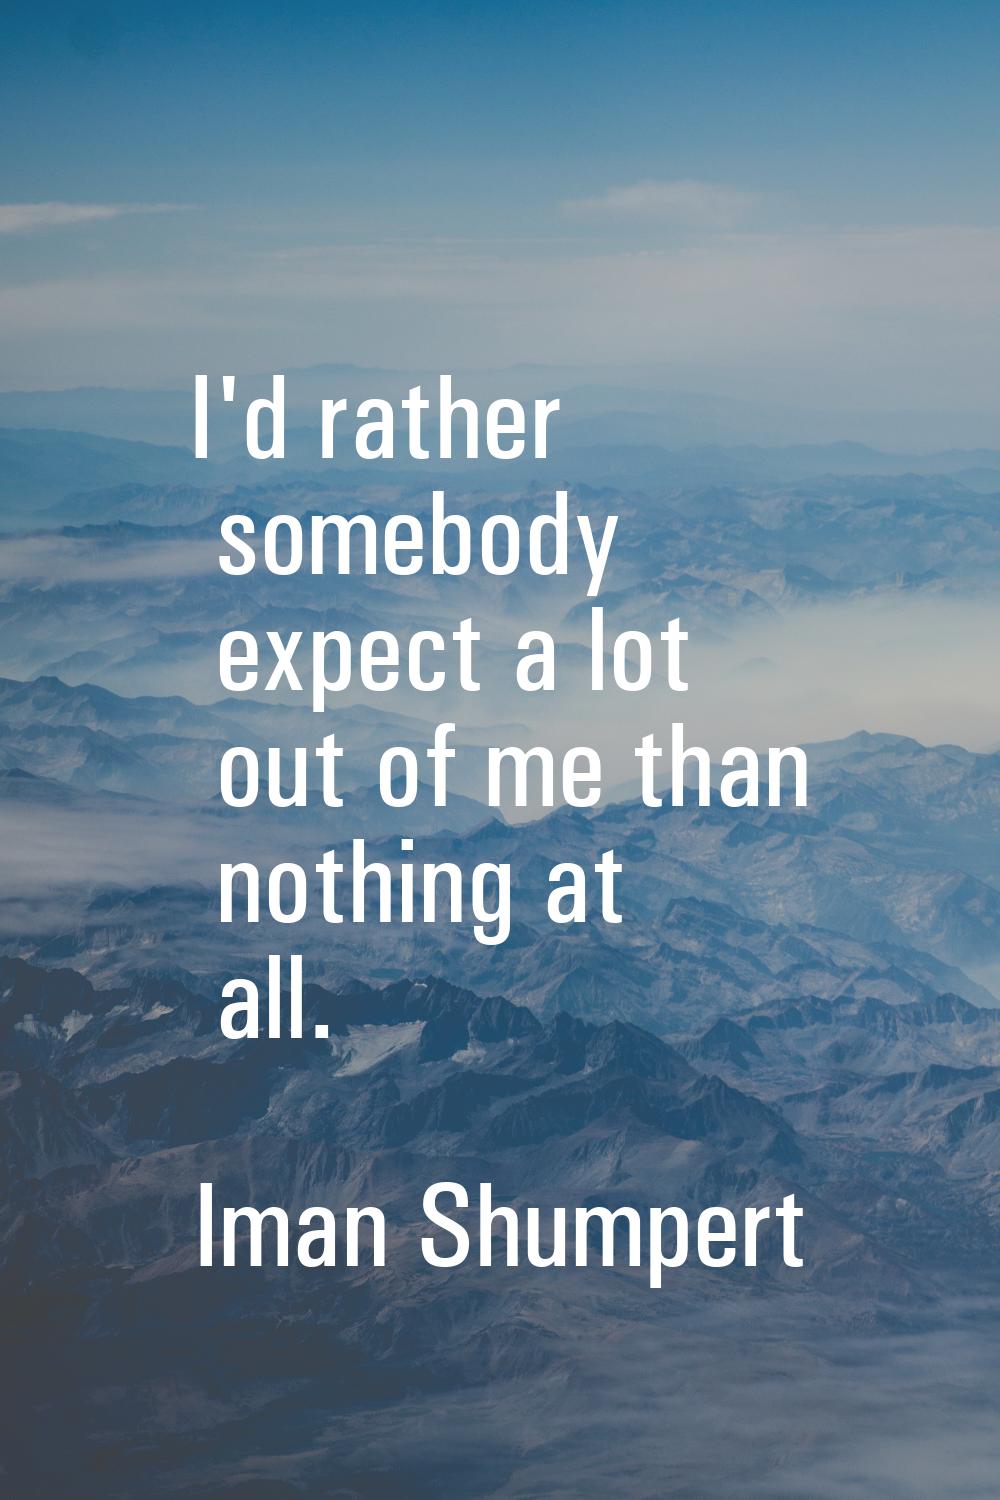 I'd rather somebody expect a lot out of me than nothing at all.